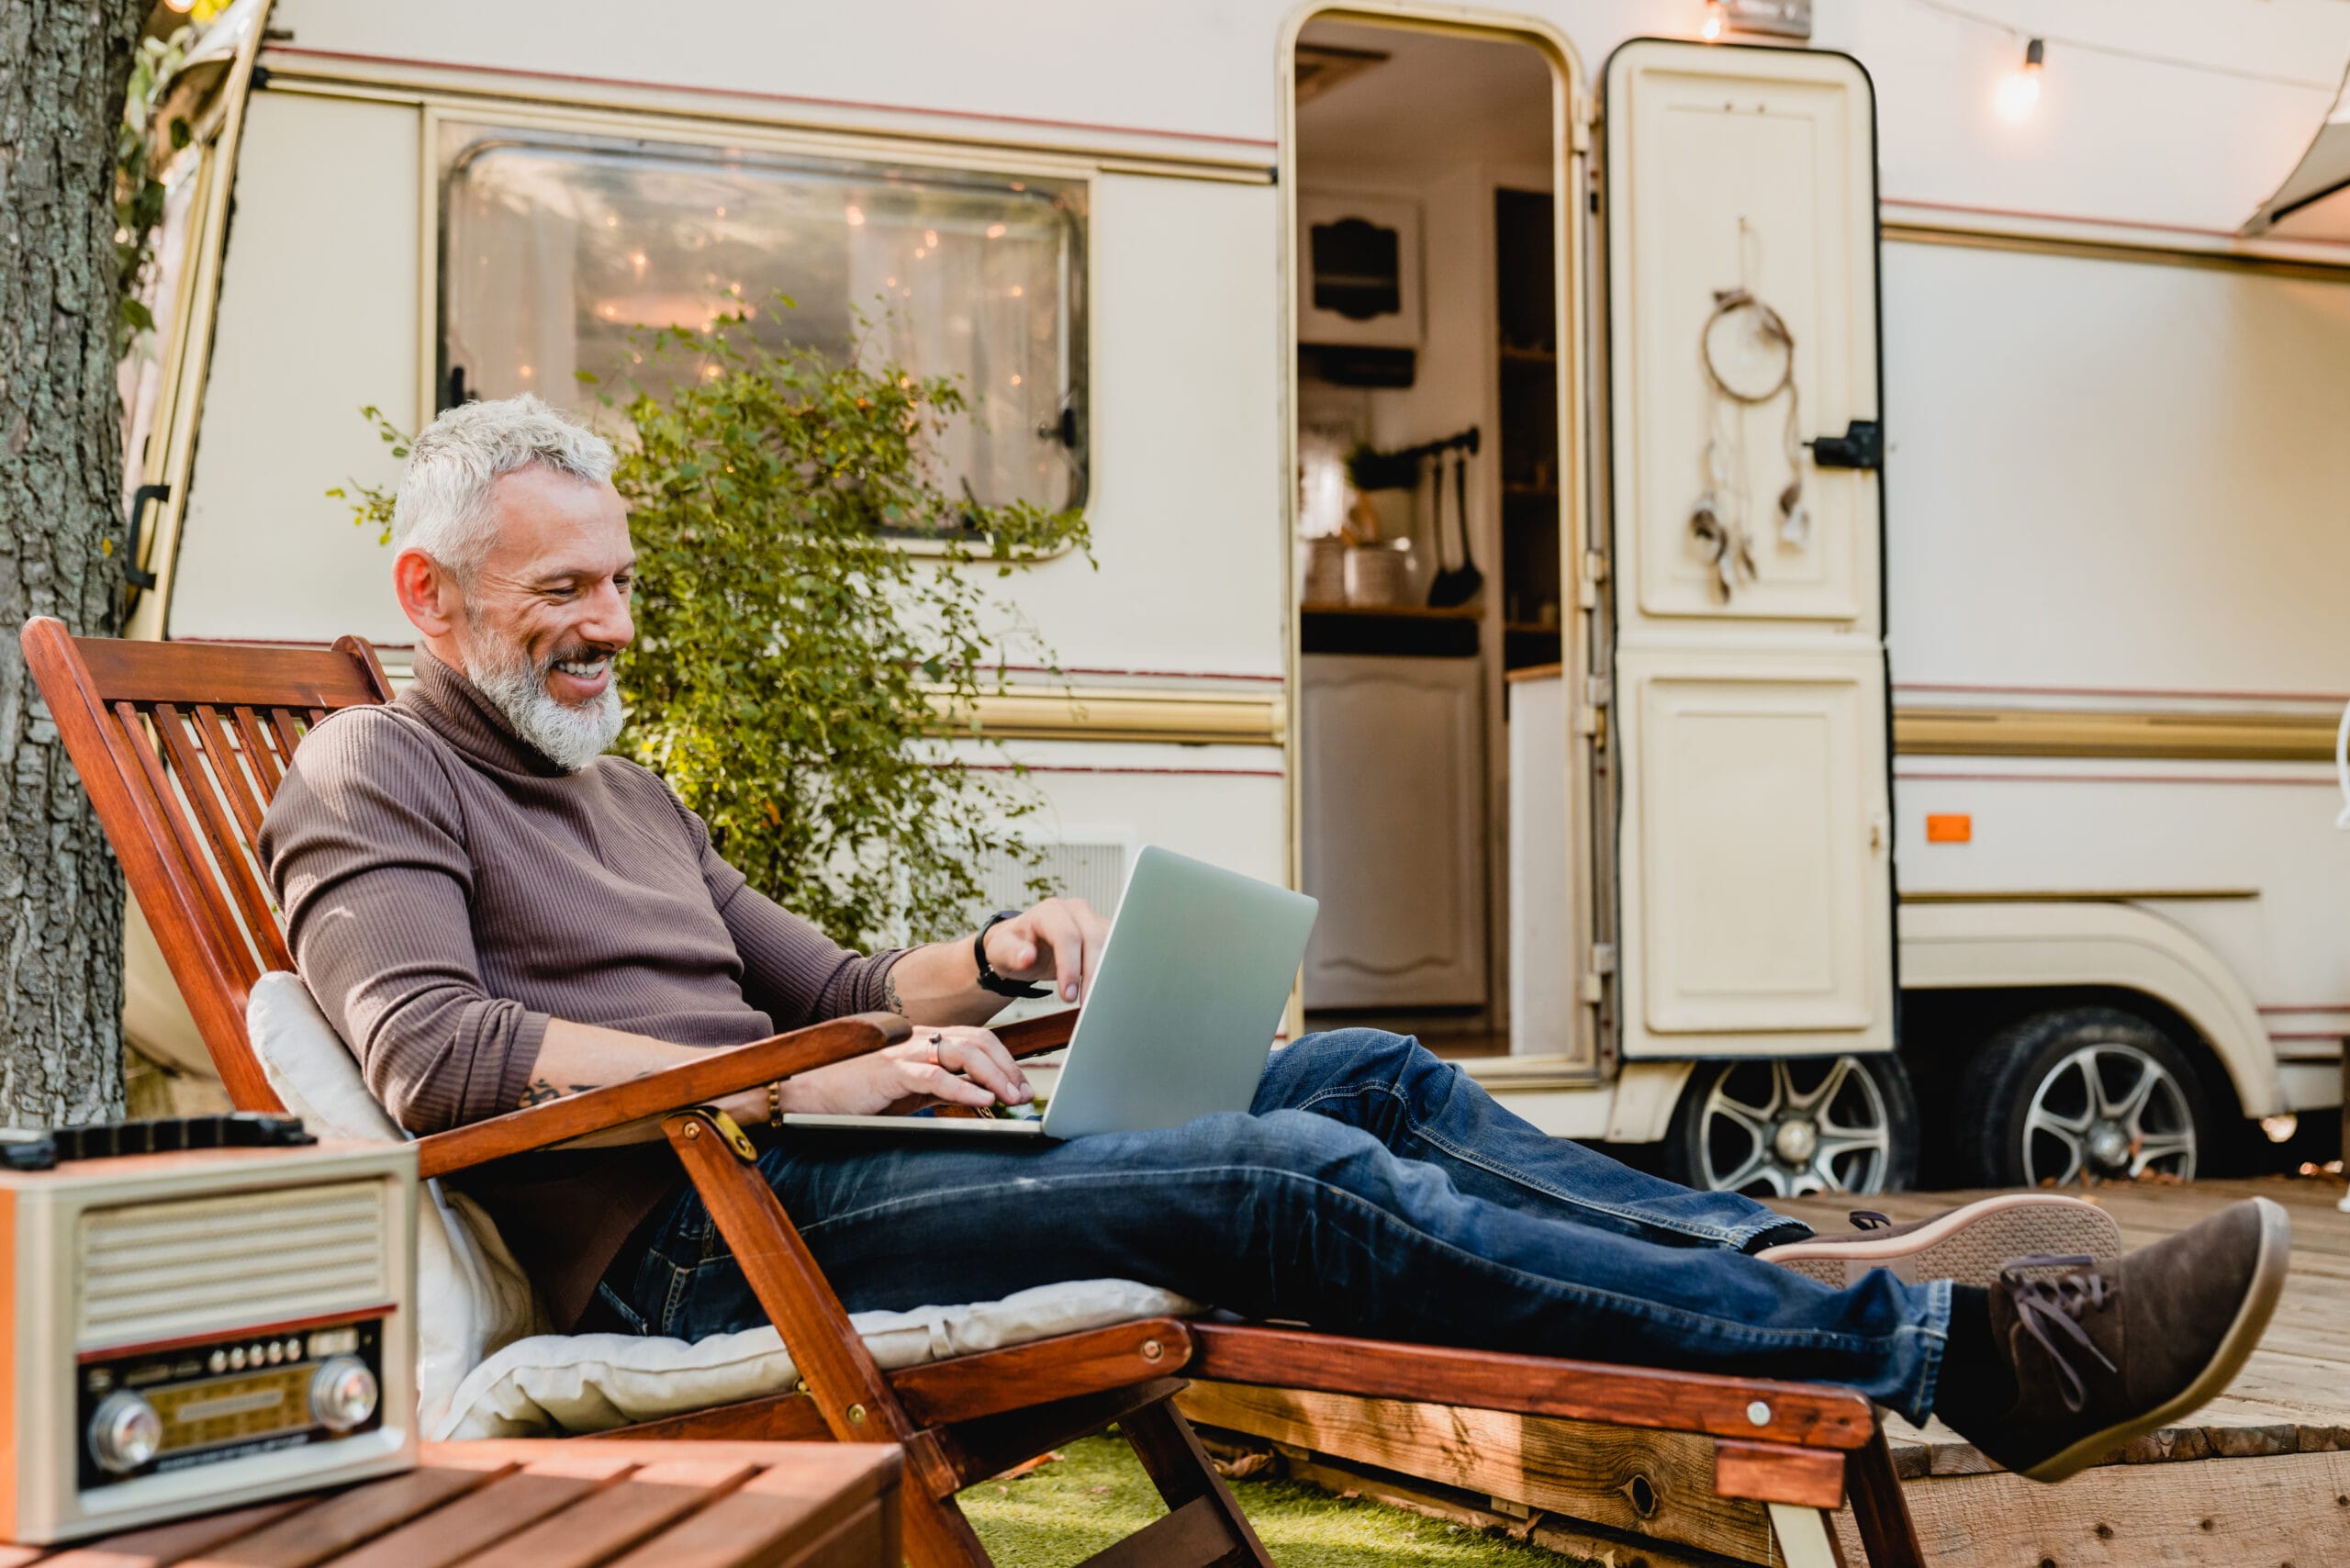 Attractive grey-haired man resting on the wooden deck chair using laptop with caravan van behind